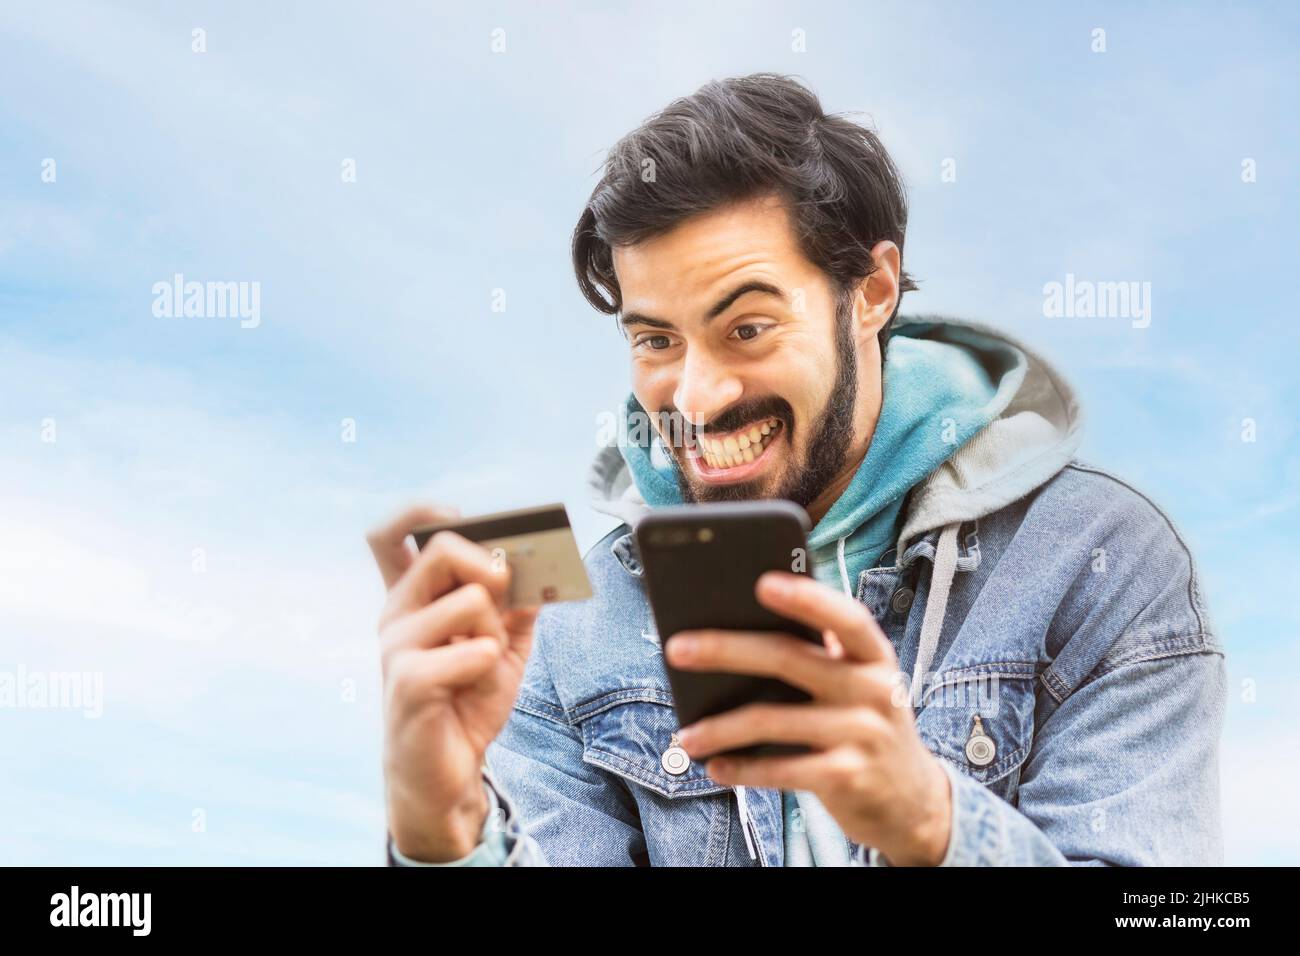 Latin man using credit card to make online payment on smartphone. Mixed race man using cellphone for shopping online. Guy using smart phone to check c Stock Photo